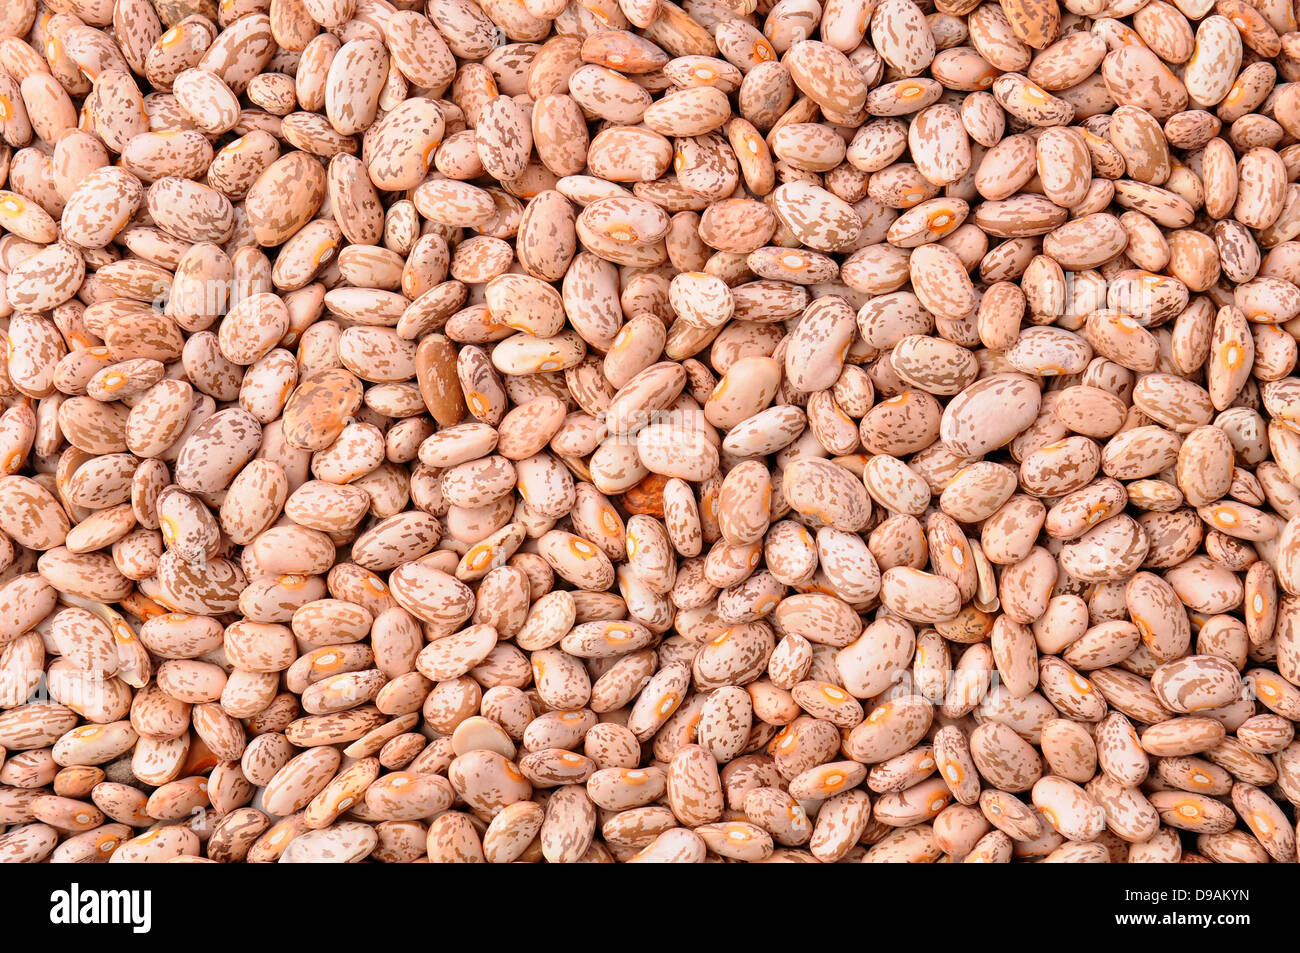 Closeup of a mass of pinto beans, fills the frame. Stock Photo